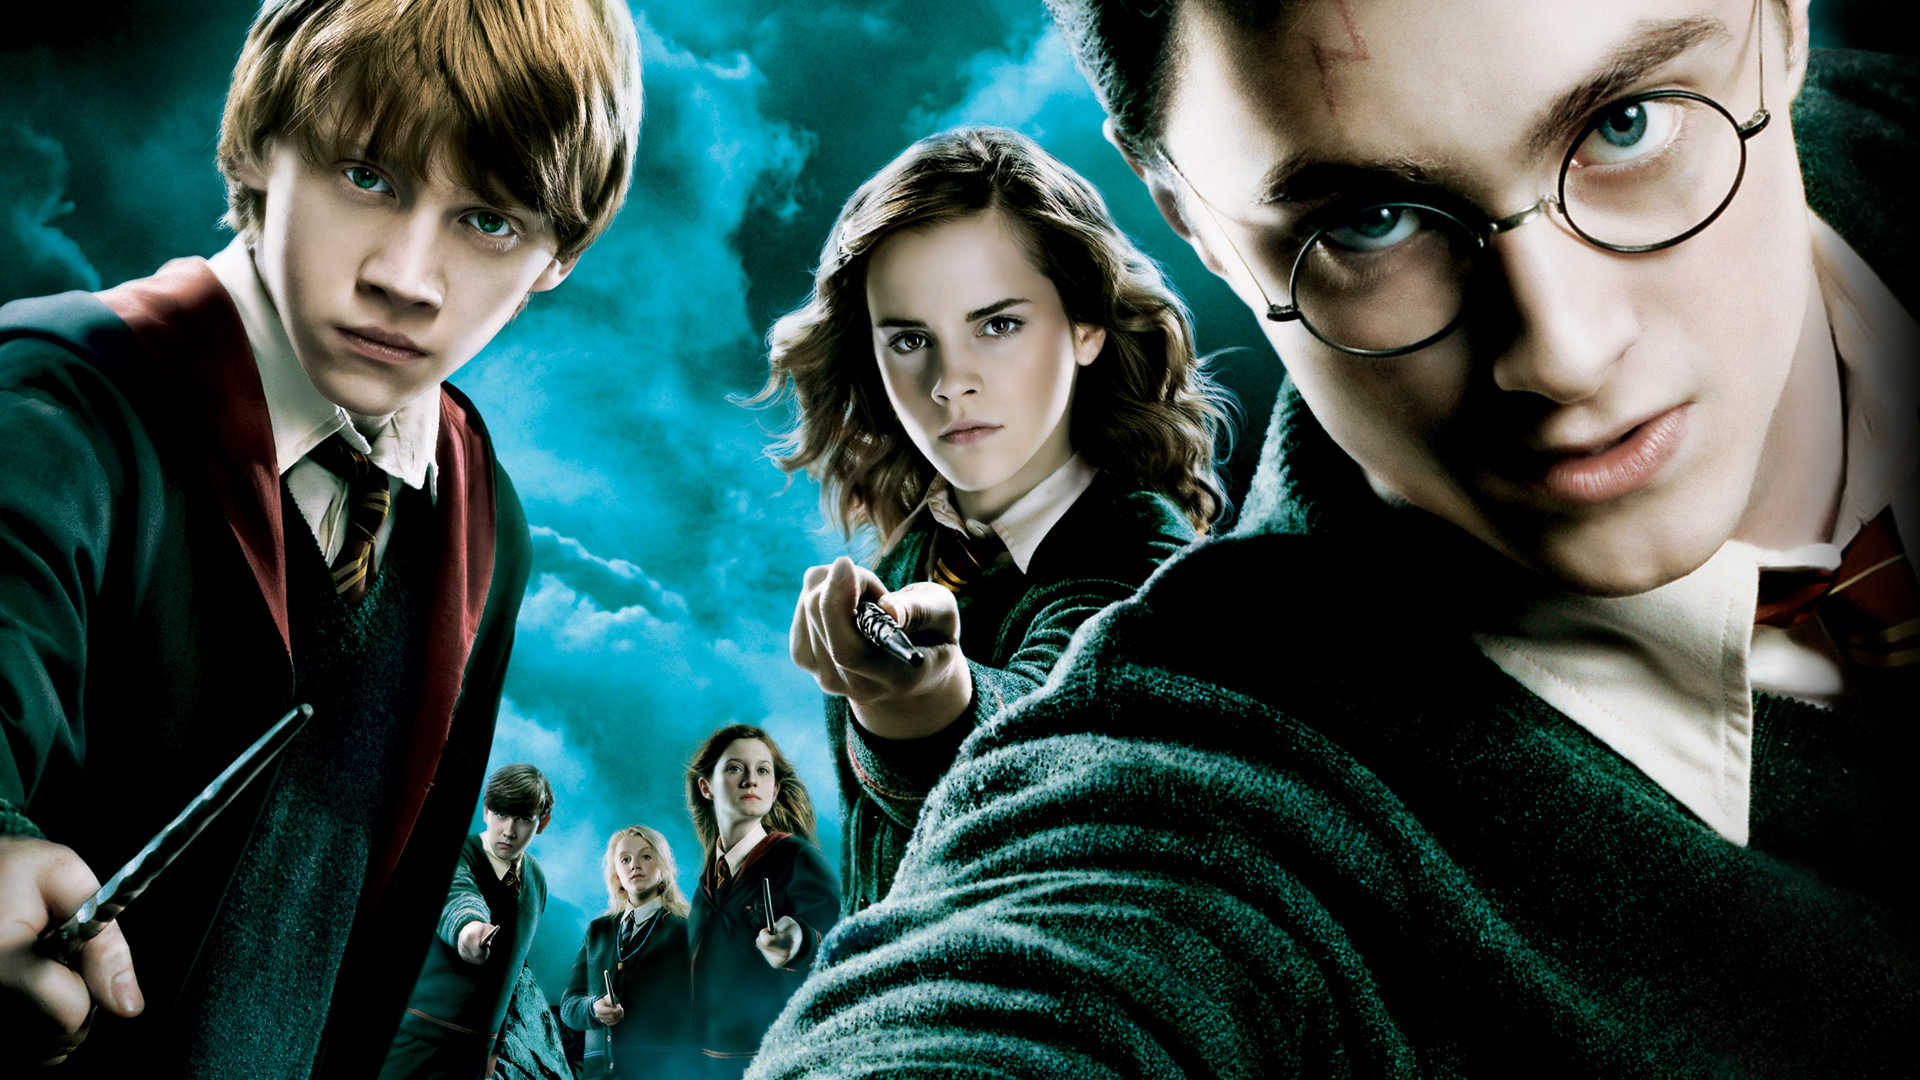 Amazing Harry Potter And The Order Of The Phoenix Pictures & Backgrounds